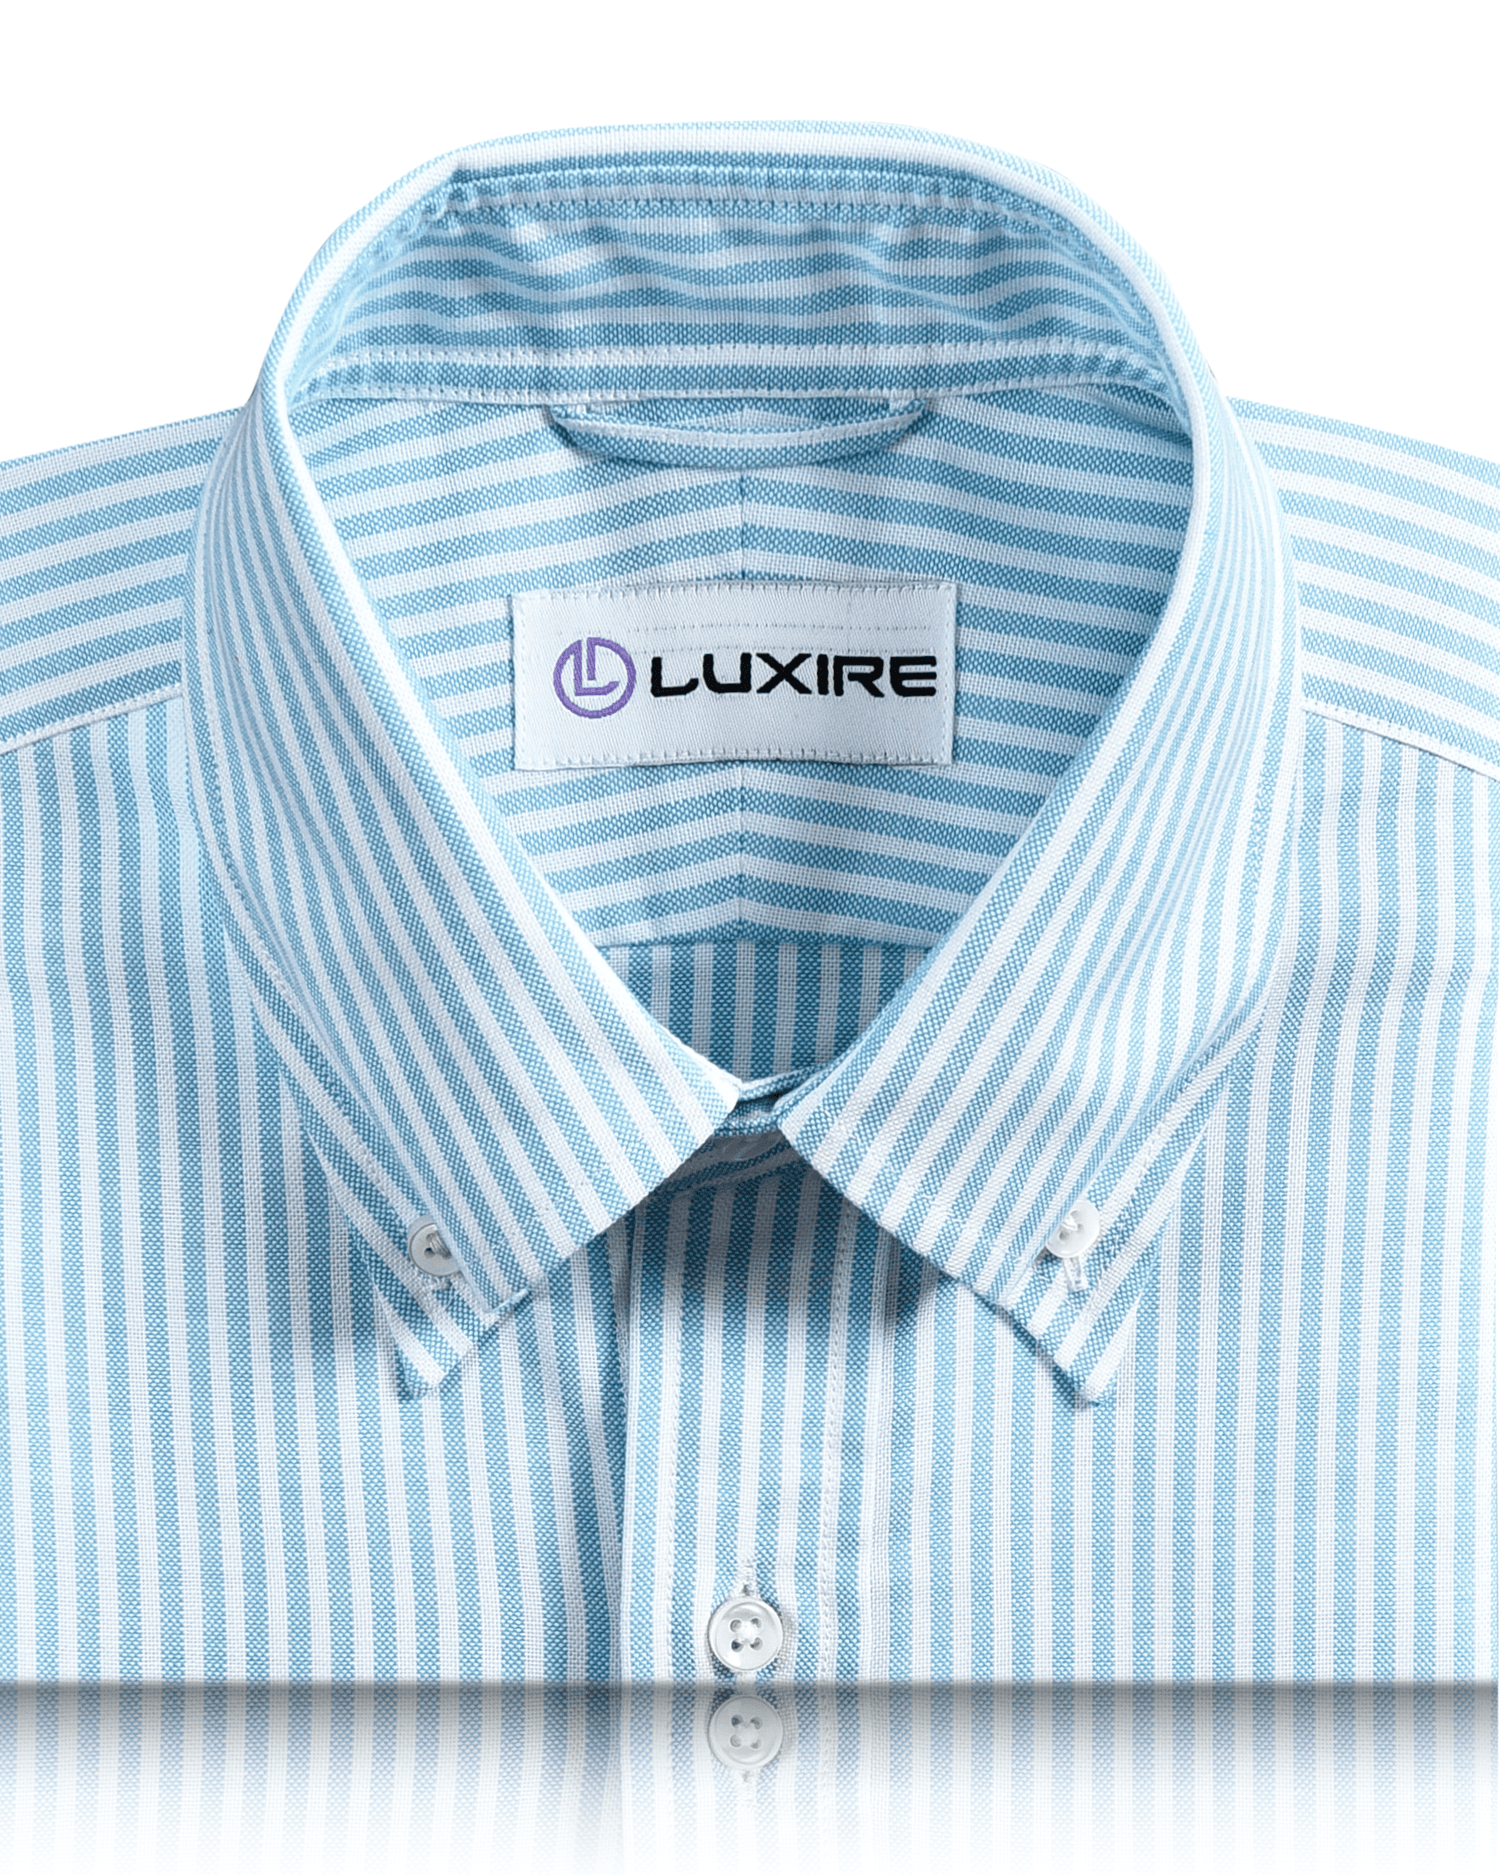 Collar of the custom oxford shirt for men by Luxire in ferozi blue on white university stripes